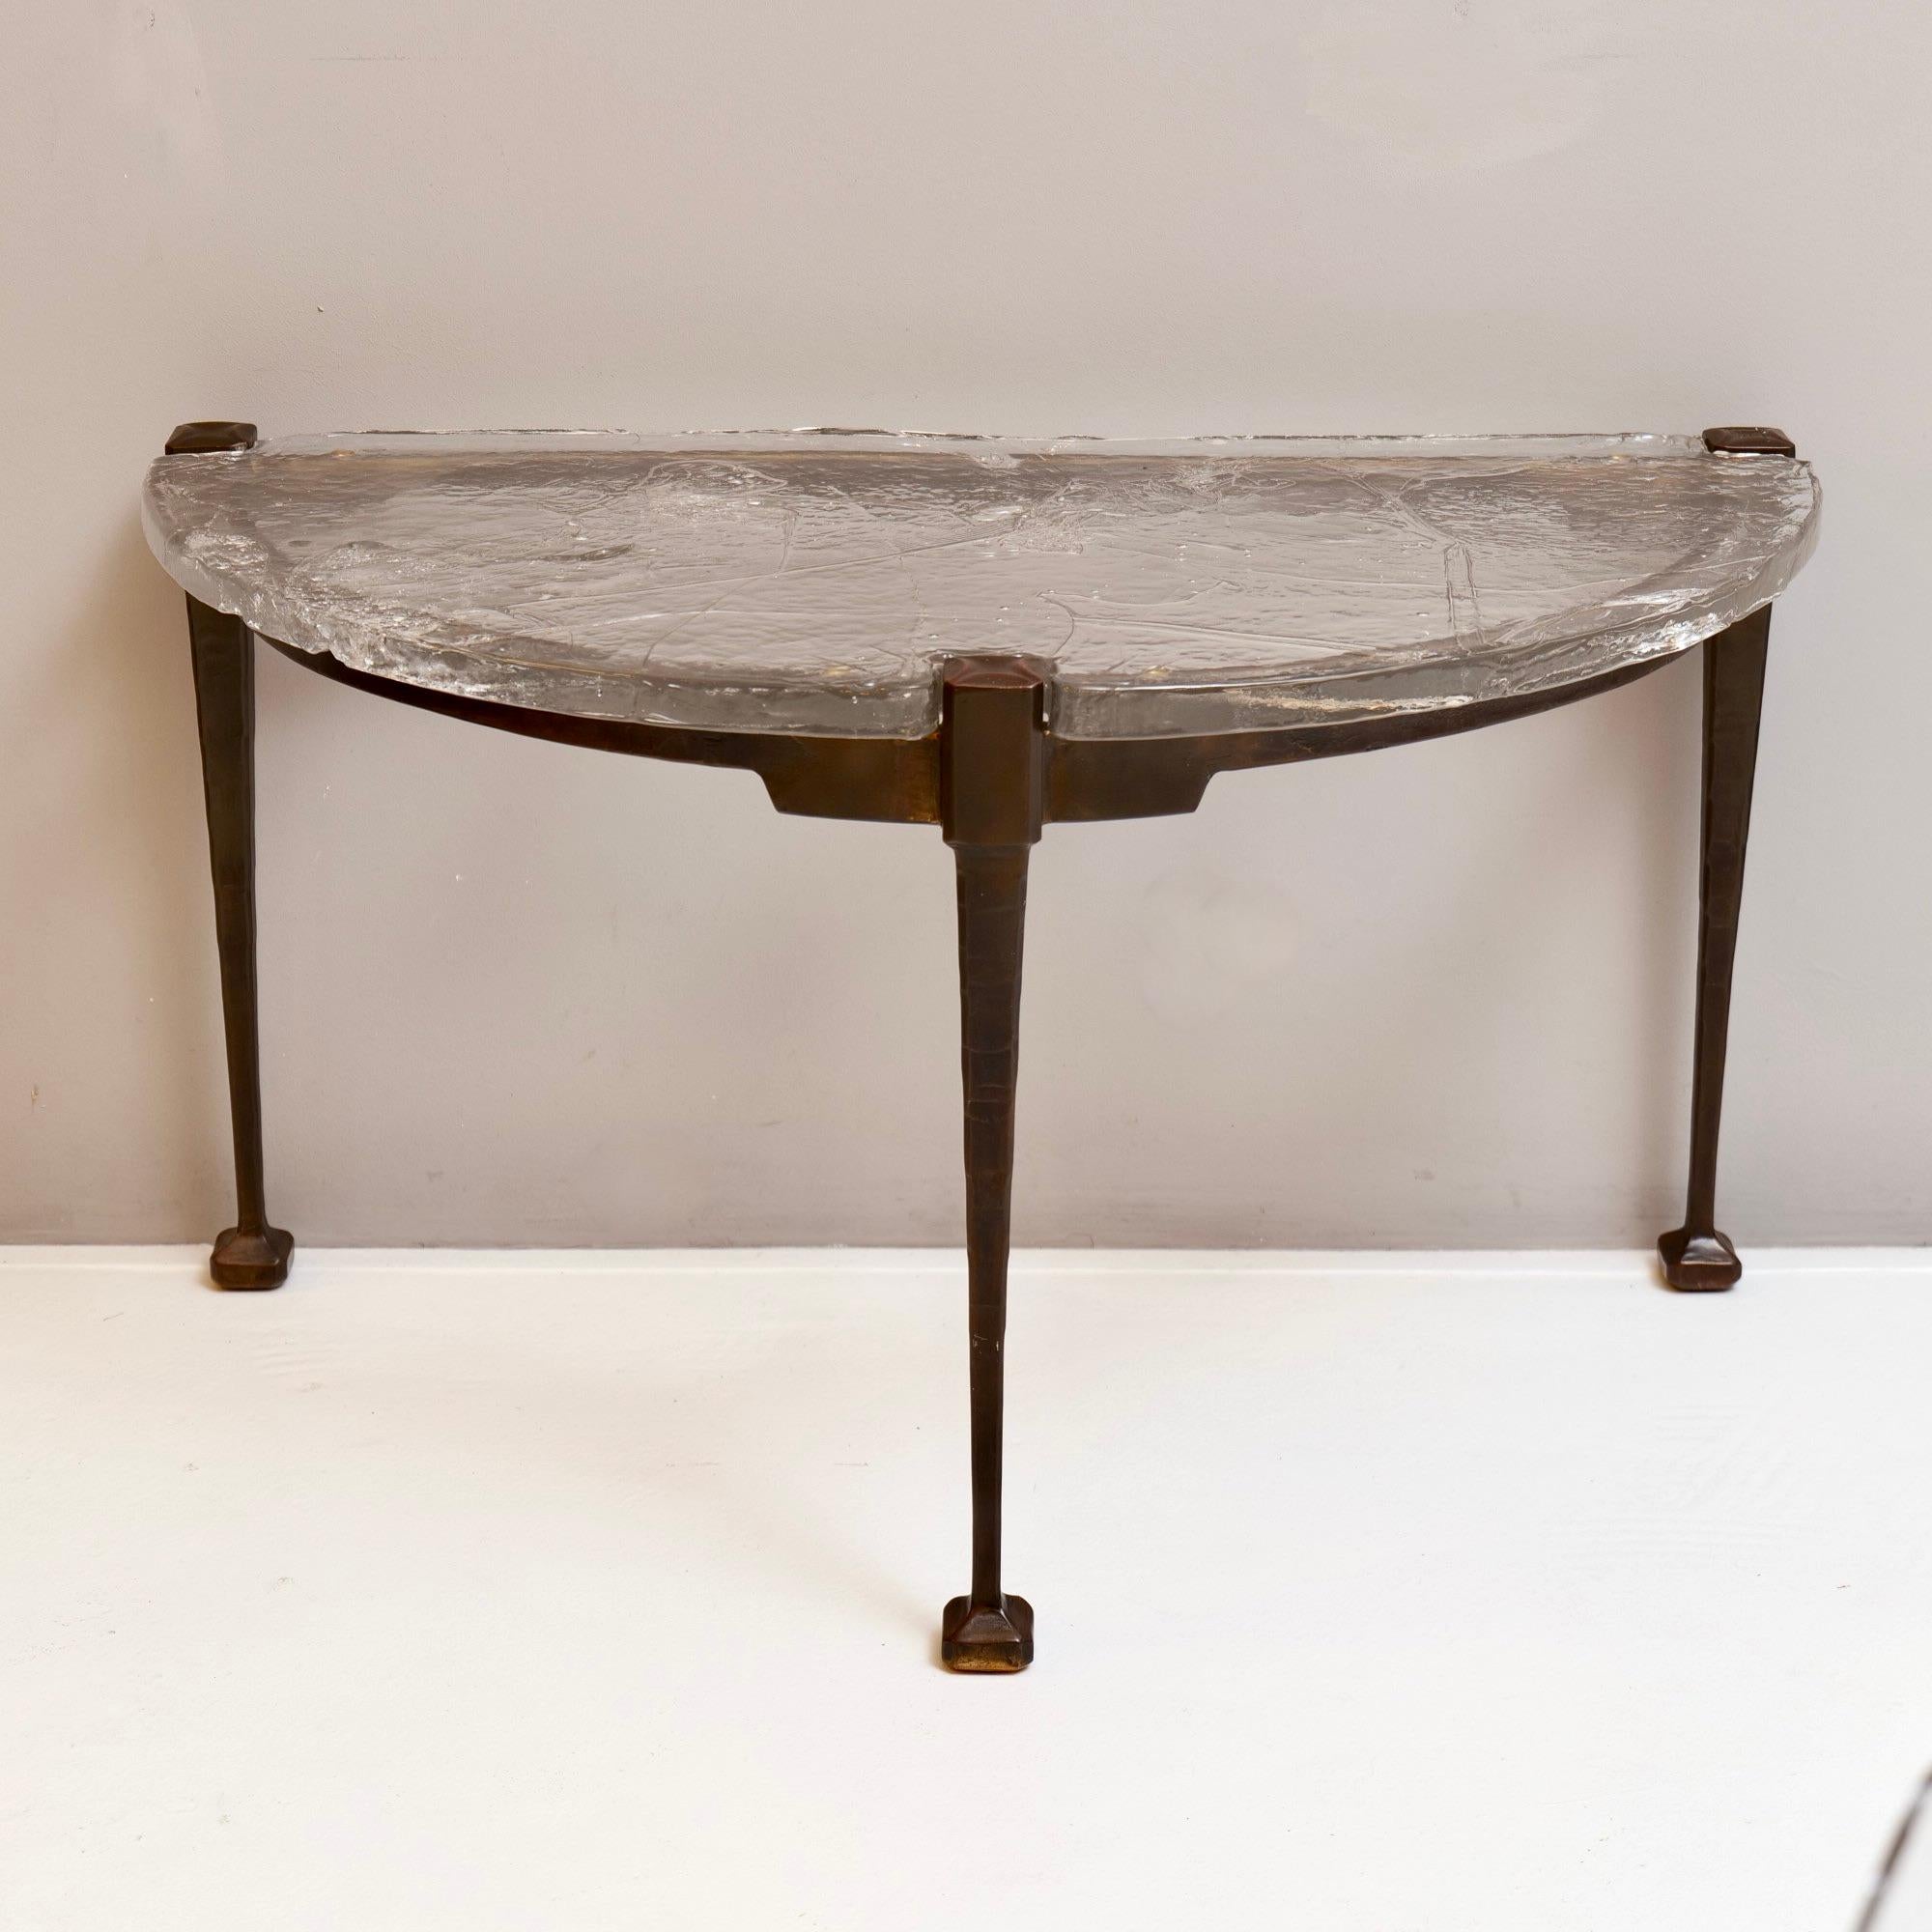 - original Lothar Klute table signed LK 94
- heavy brutalist cast glass and forged bronze
- 80s brutalism design
- perfect condition
- beautiful patina

size:
79 x cm x 45 cm  x 45 cm
